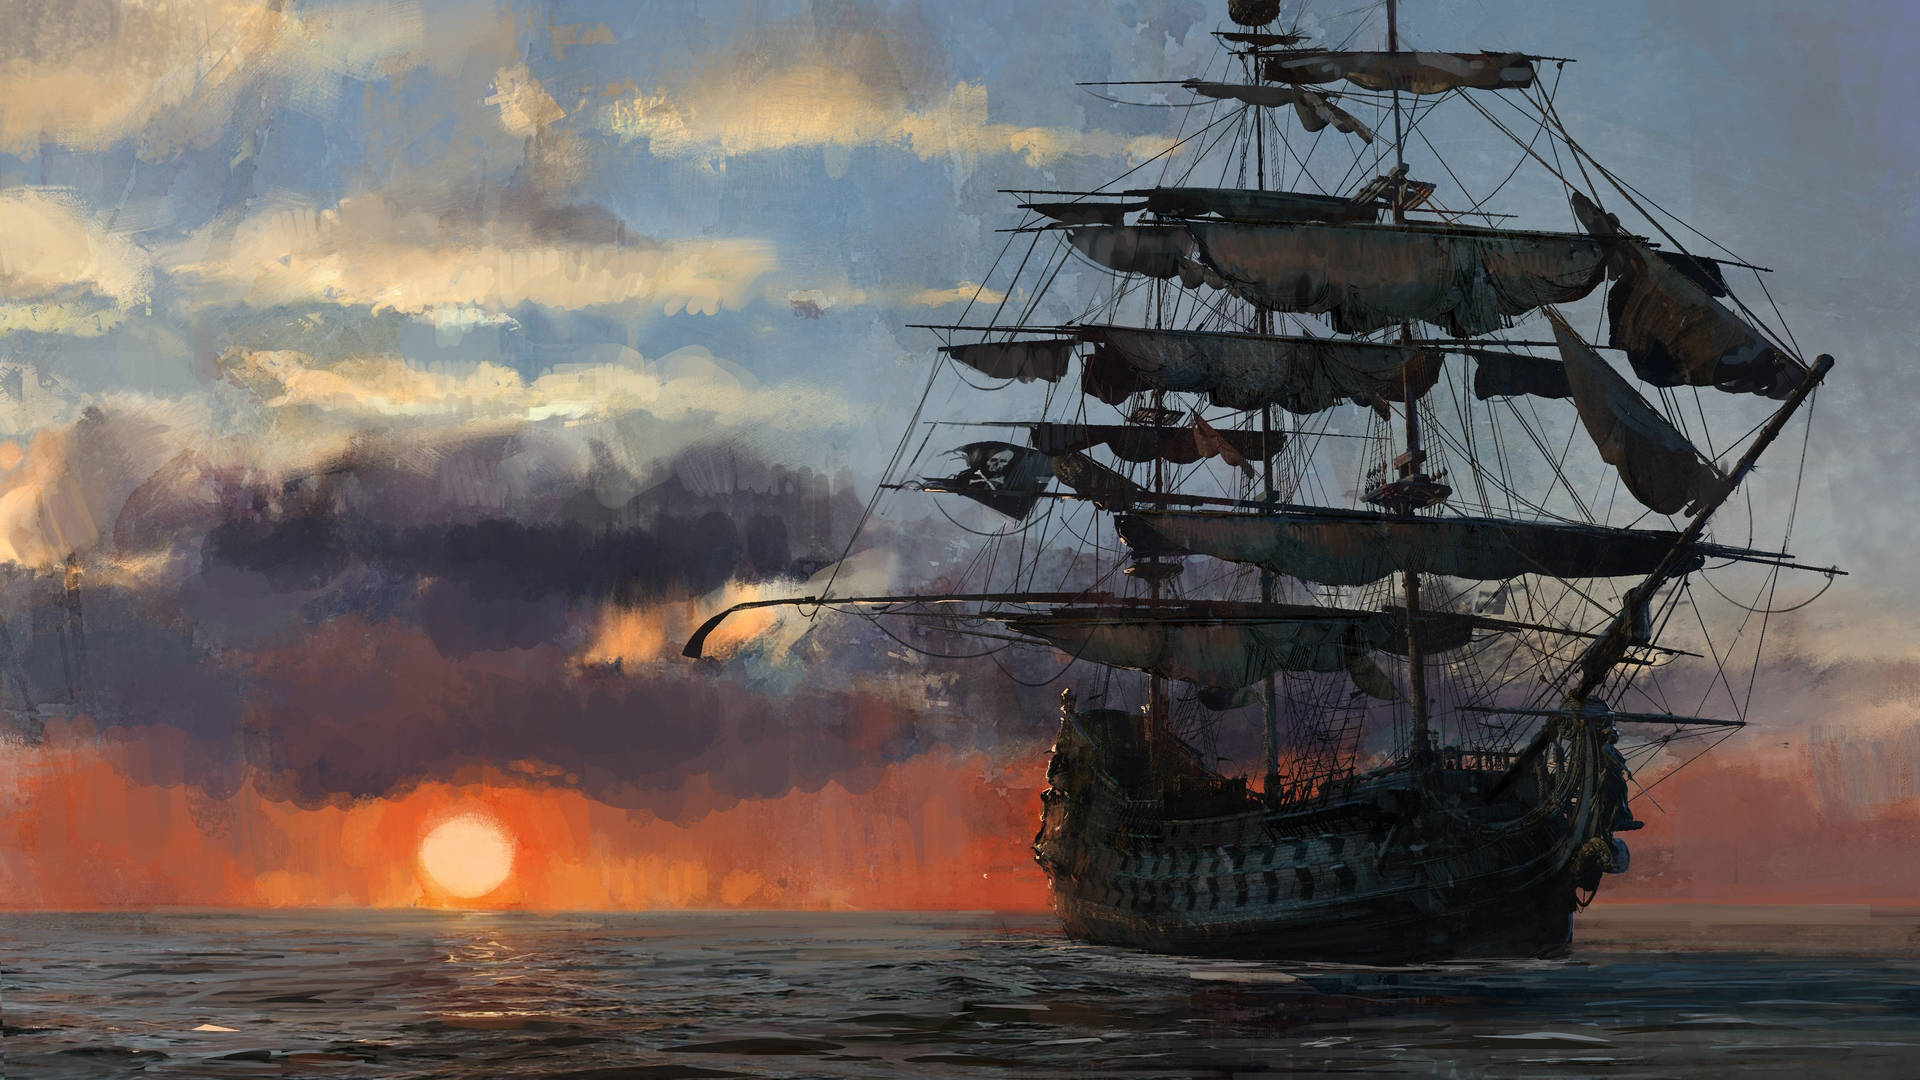 Pirate Ship Sunset Painting Background